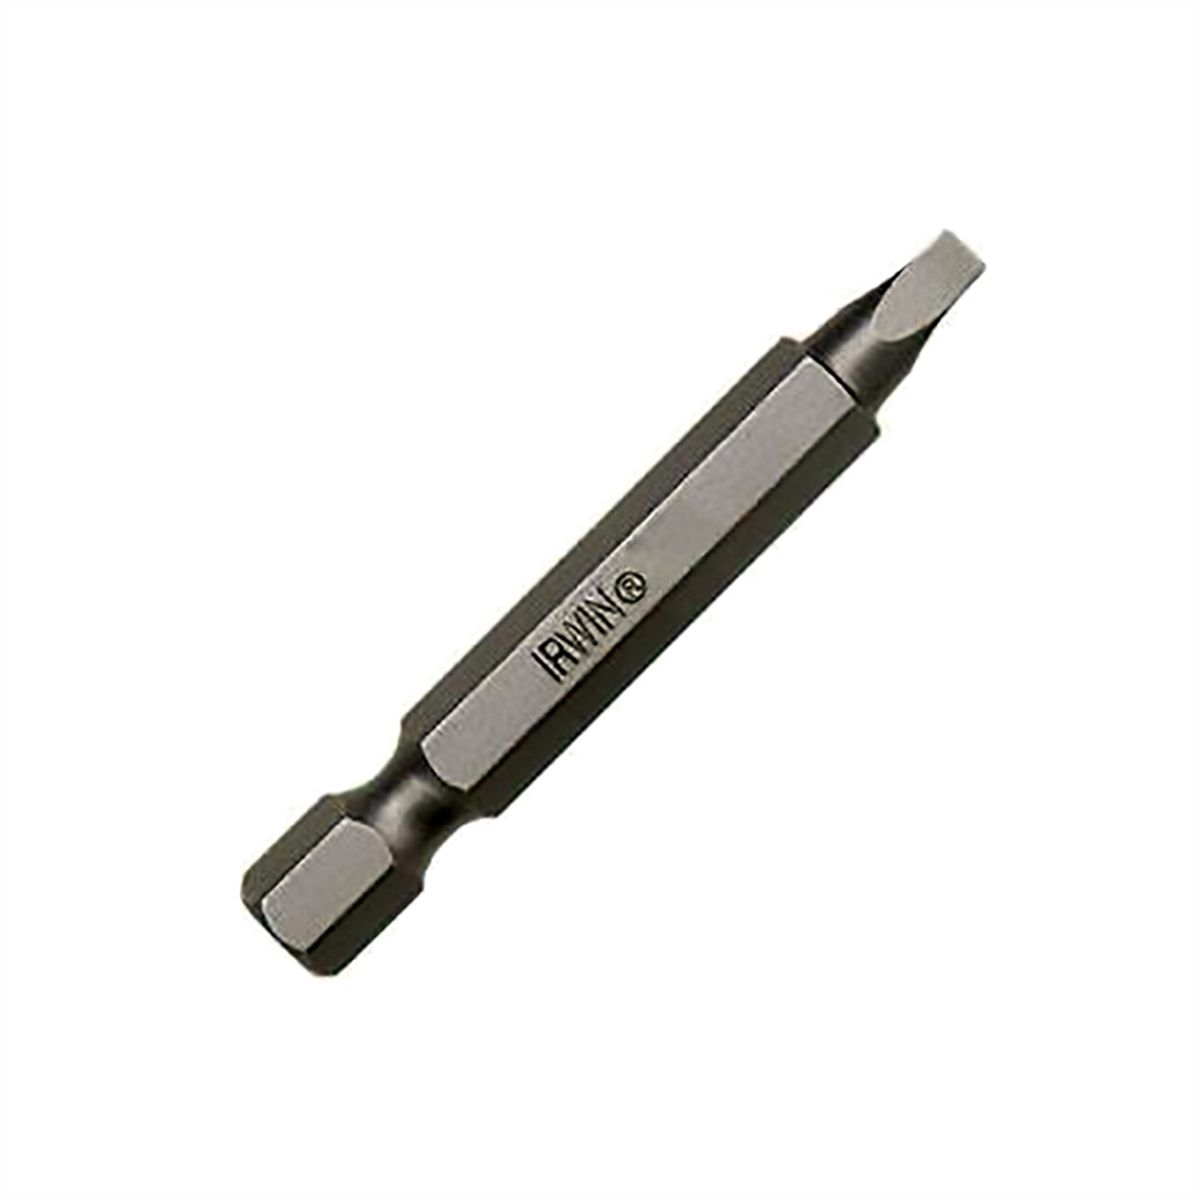 Square Recess Power Bit #2, 1/4 Inch Hex Shank w Groove 6 Inch L